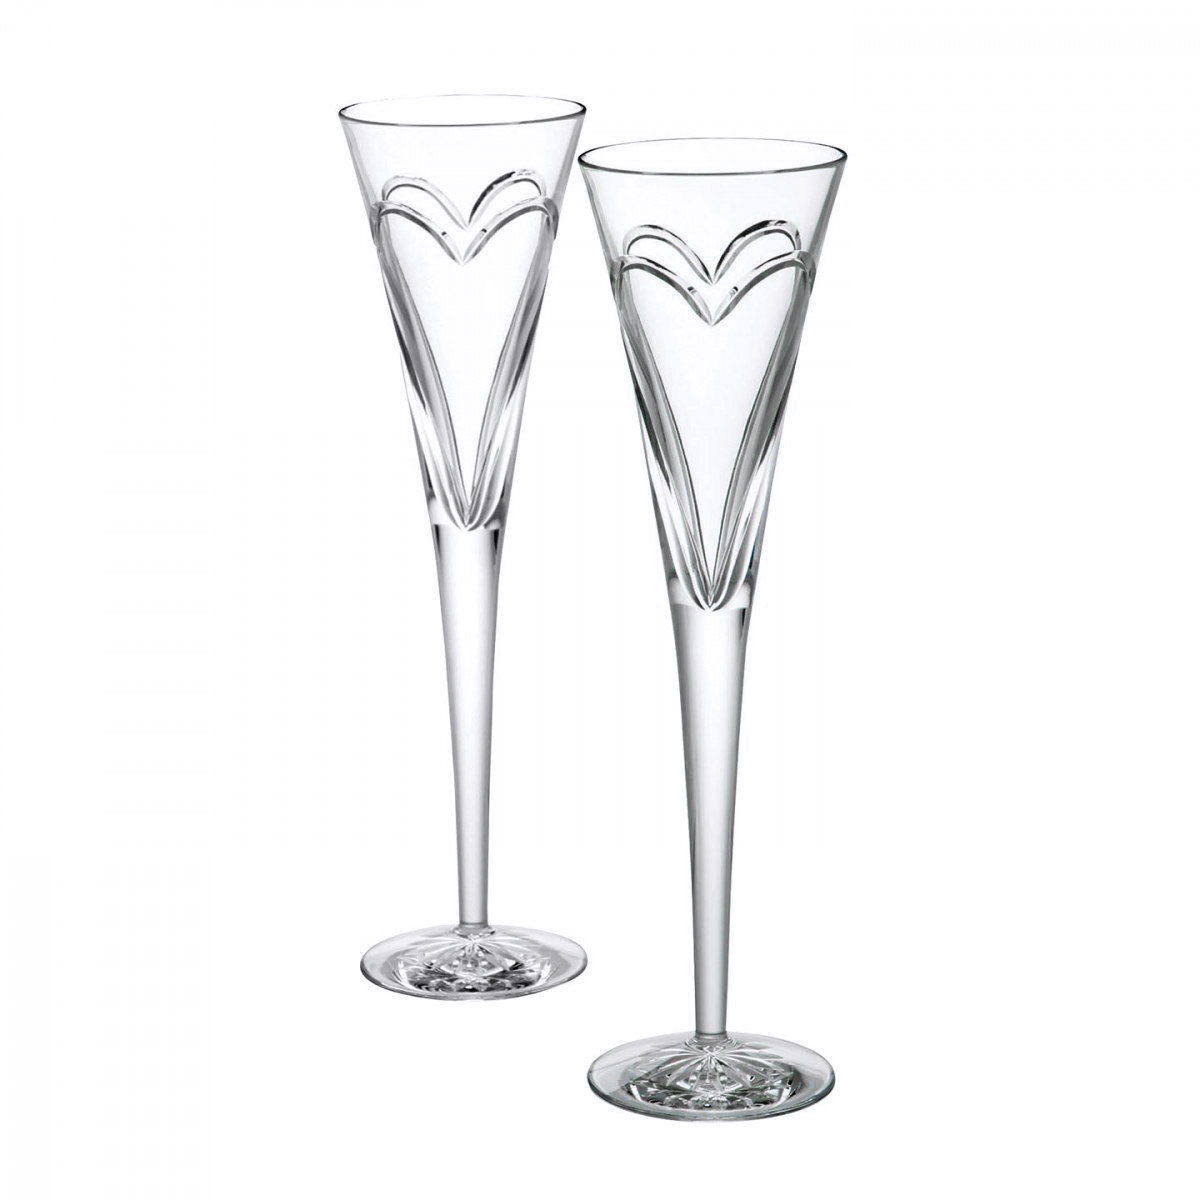 Celebrations Set of 2 Elegant Finish & High Grade Crystal Glass and Special Occasions Perfect Toasting Flutes For Weddings Gifts Rose Gold Champagne Glasses by BXB 